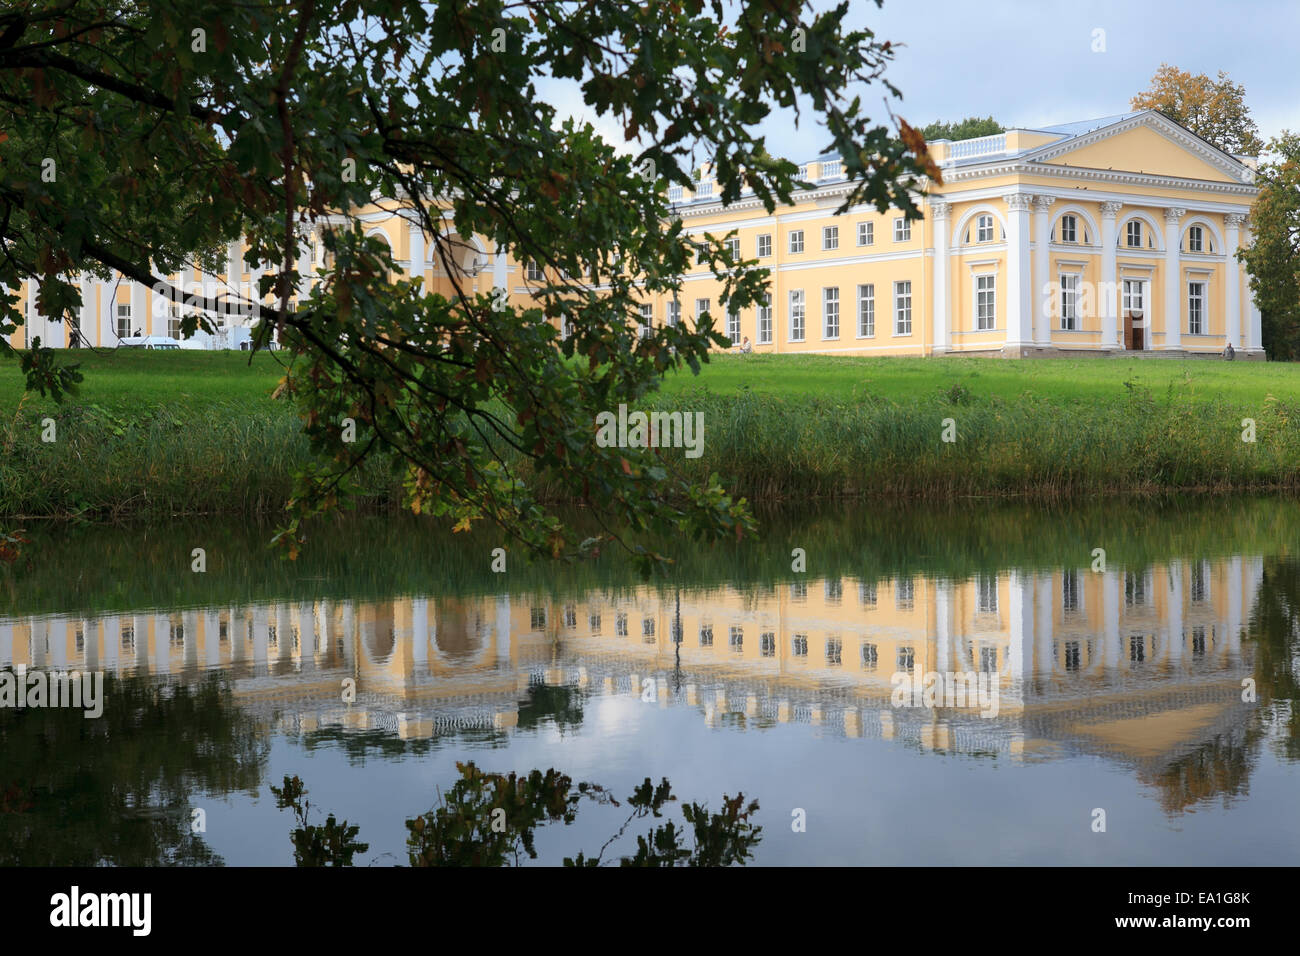 The Alexander Palace is a former imperial residence at Tsarskoye Selo. Stock Photo